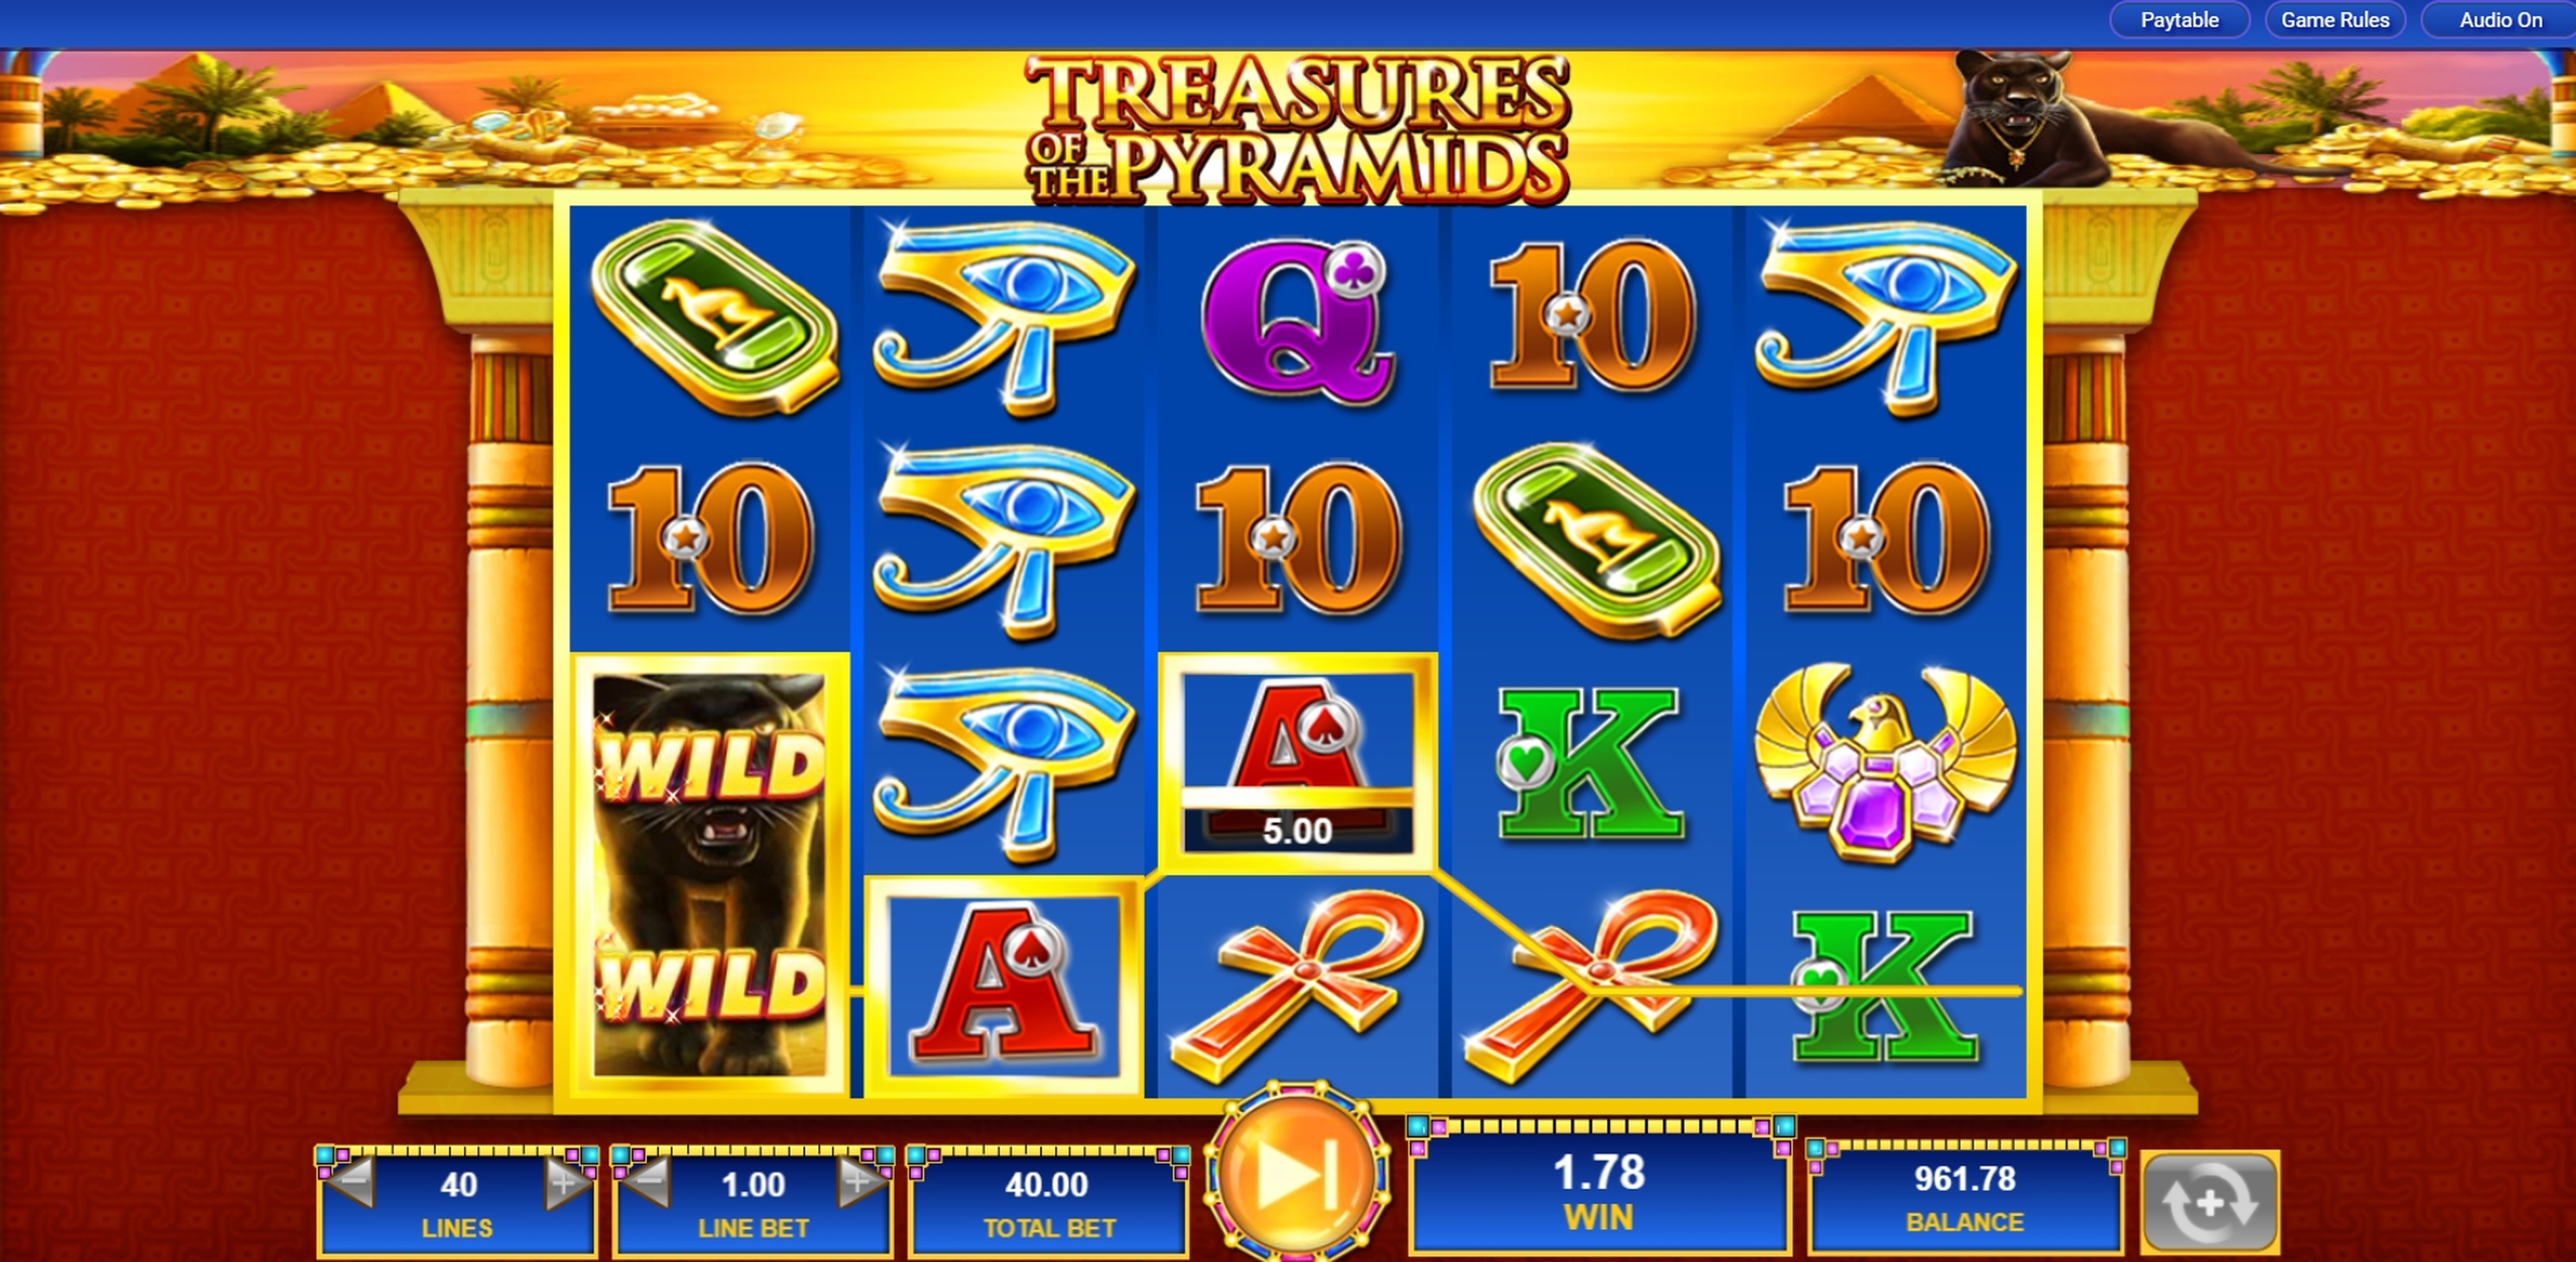 Win Money in Treasures of the Pyramids Free Slot Game by IGT